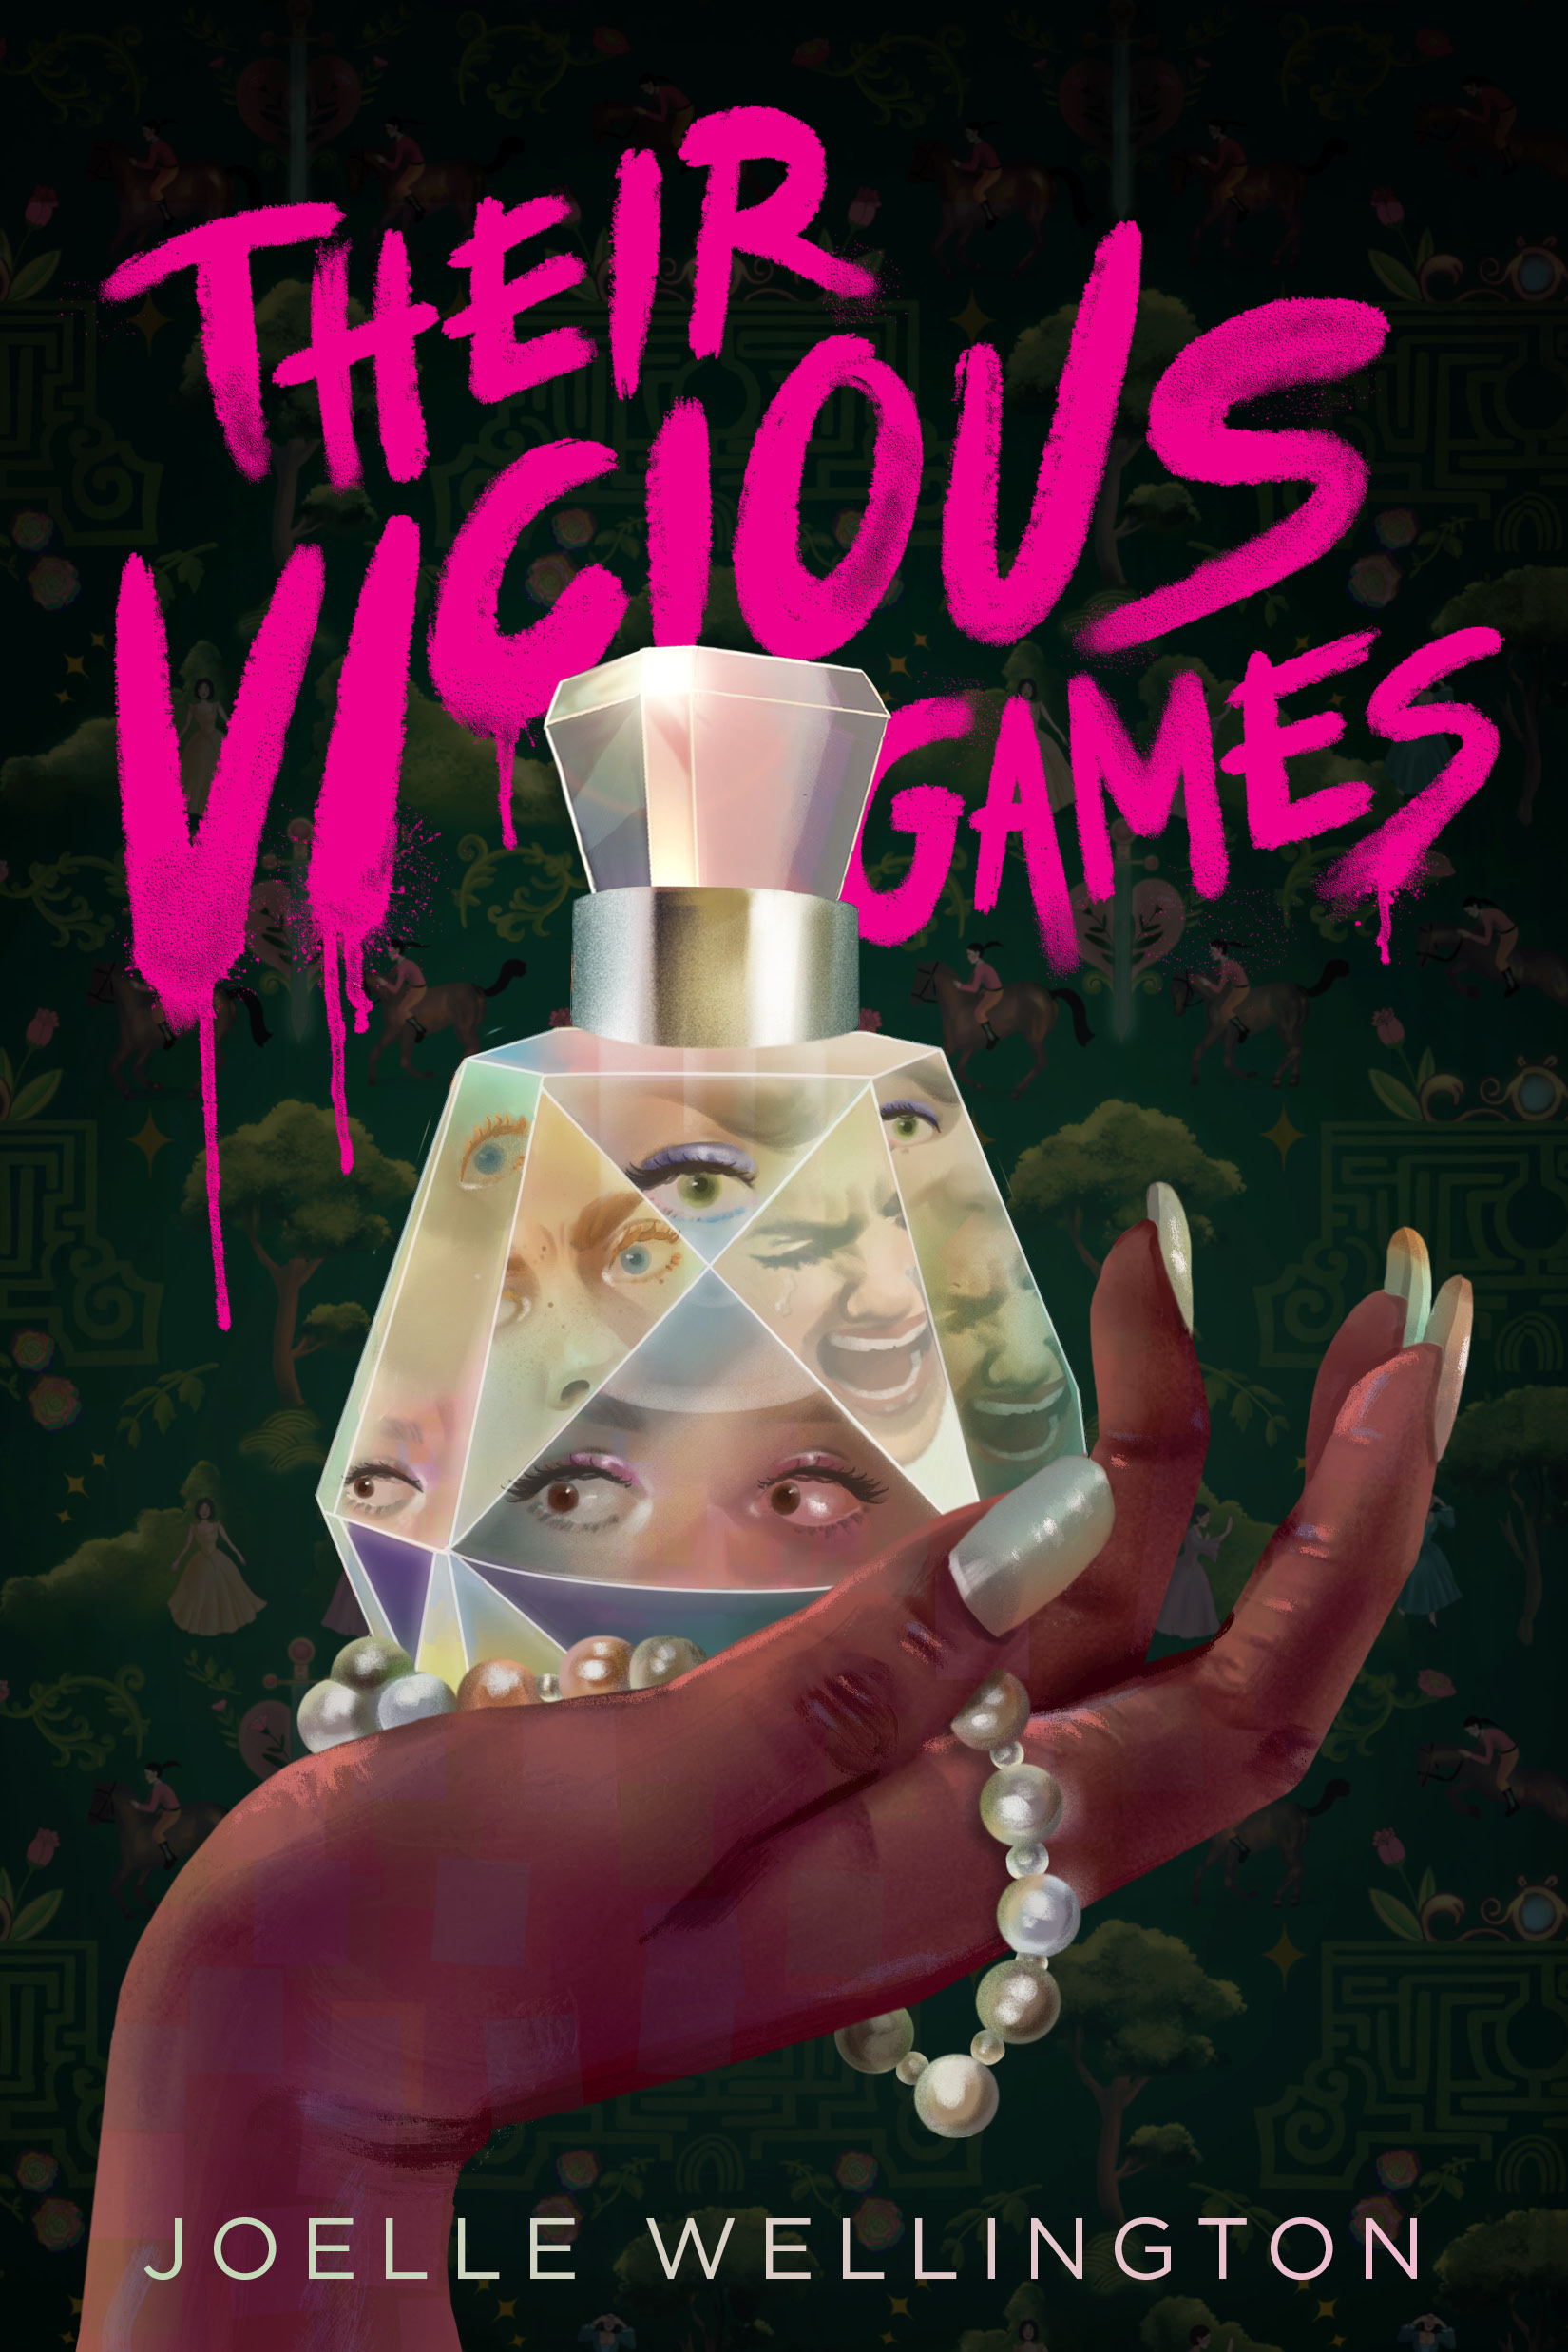 Image for "Their Vicious Games"